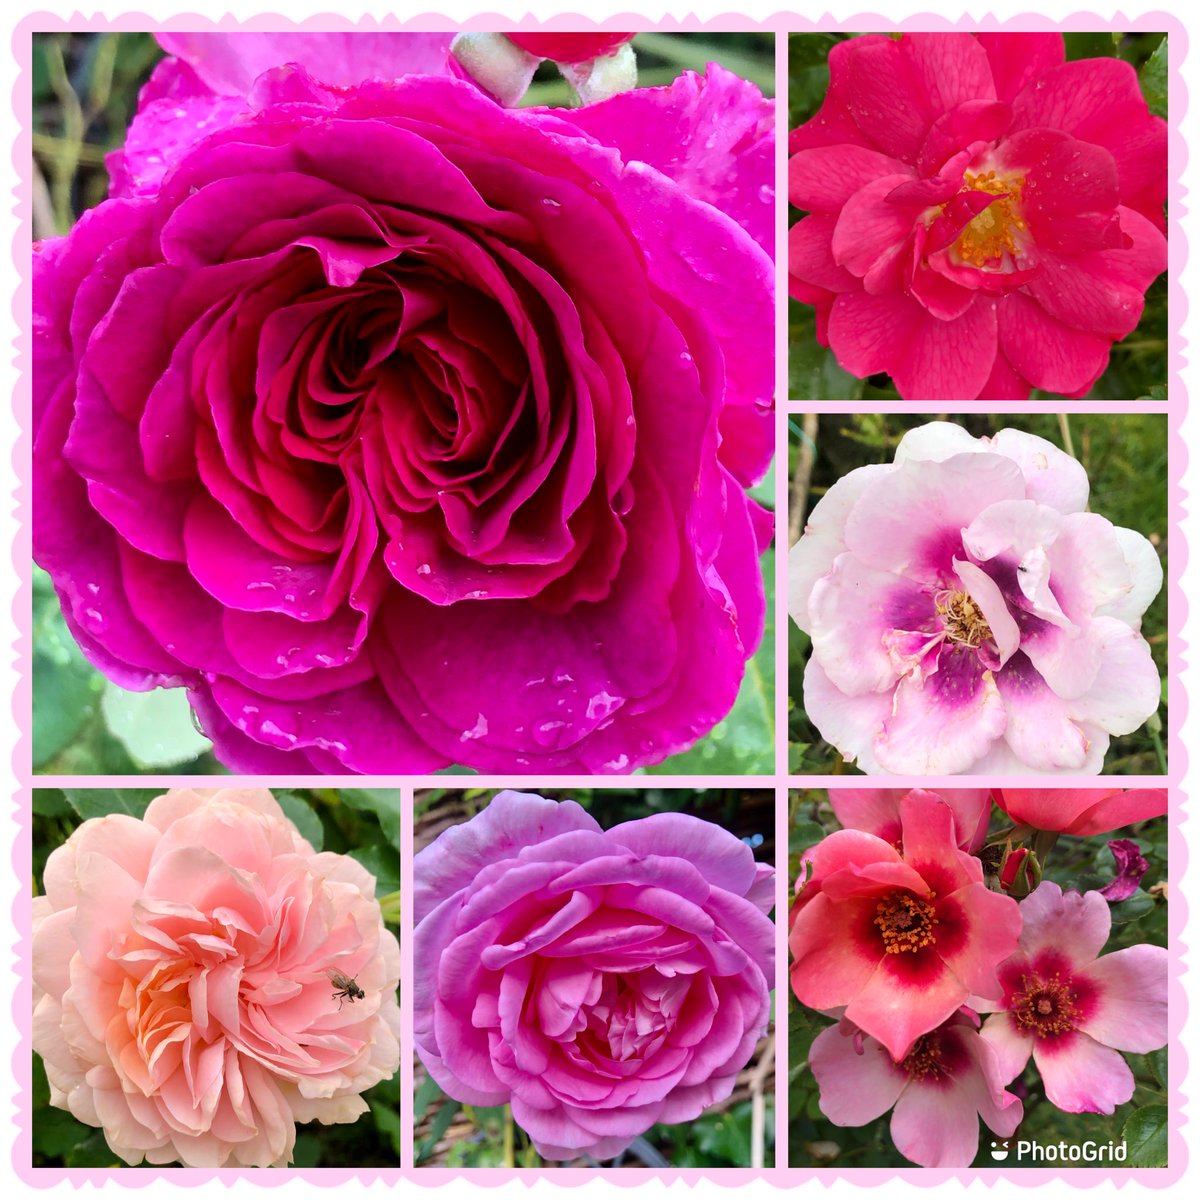 Looking forward to the roses blooming again #RoseWednesday #Roses #Gardening